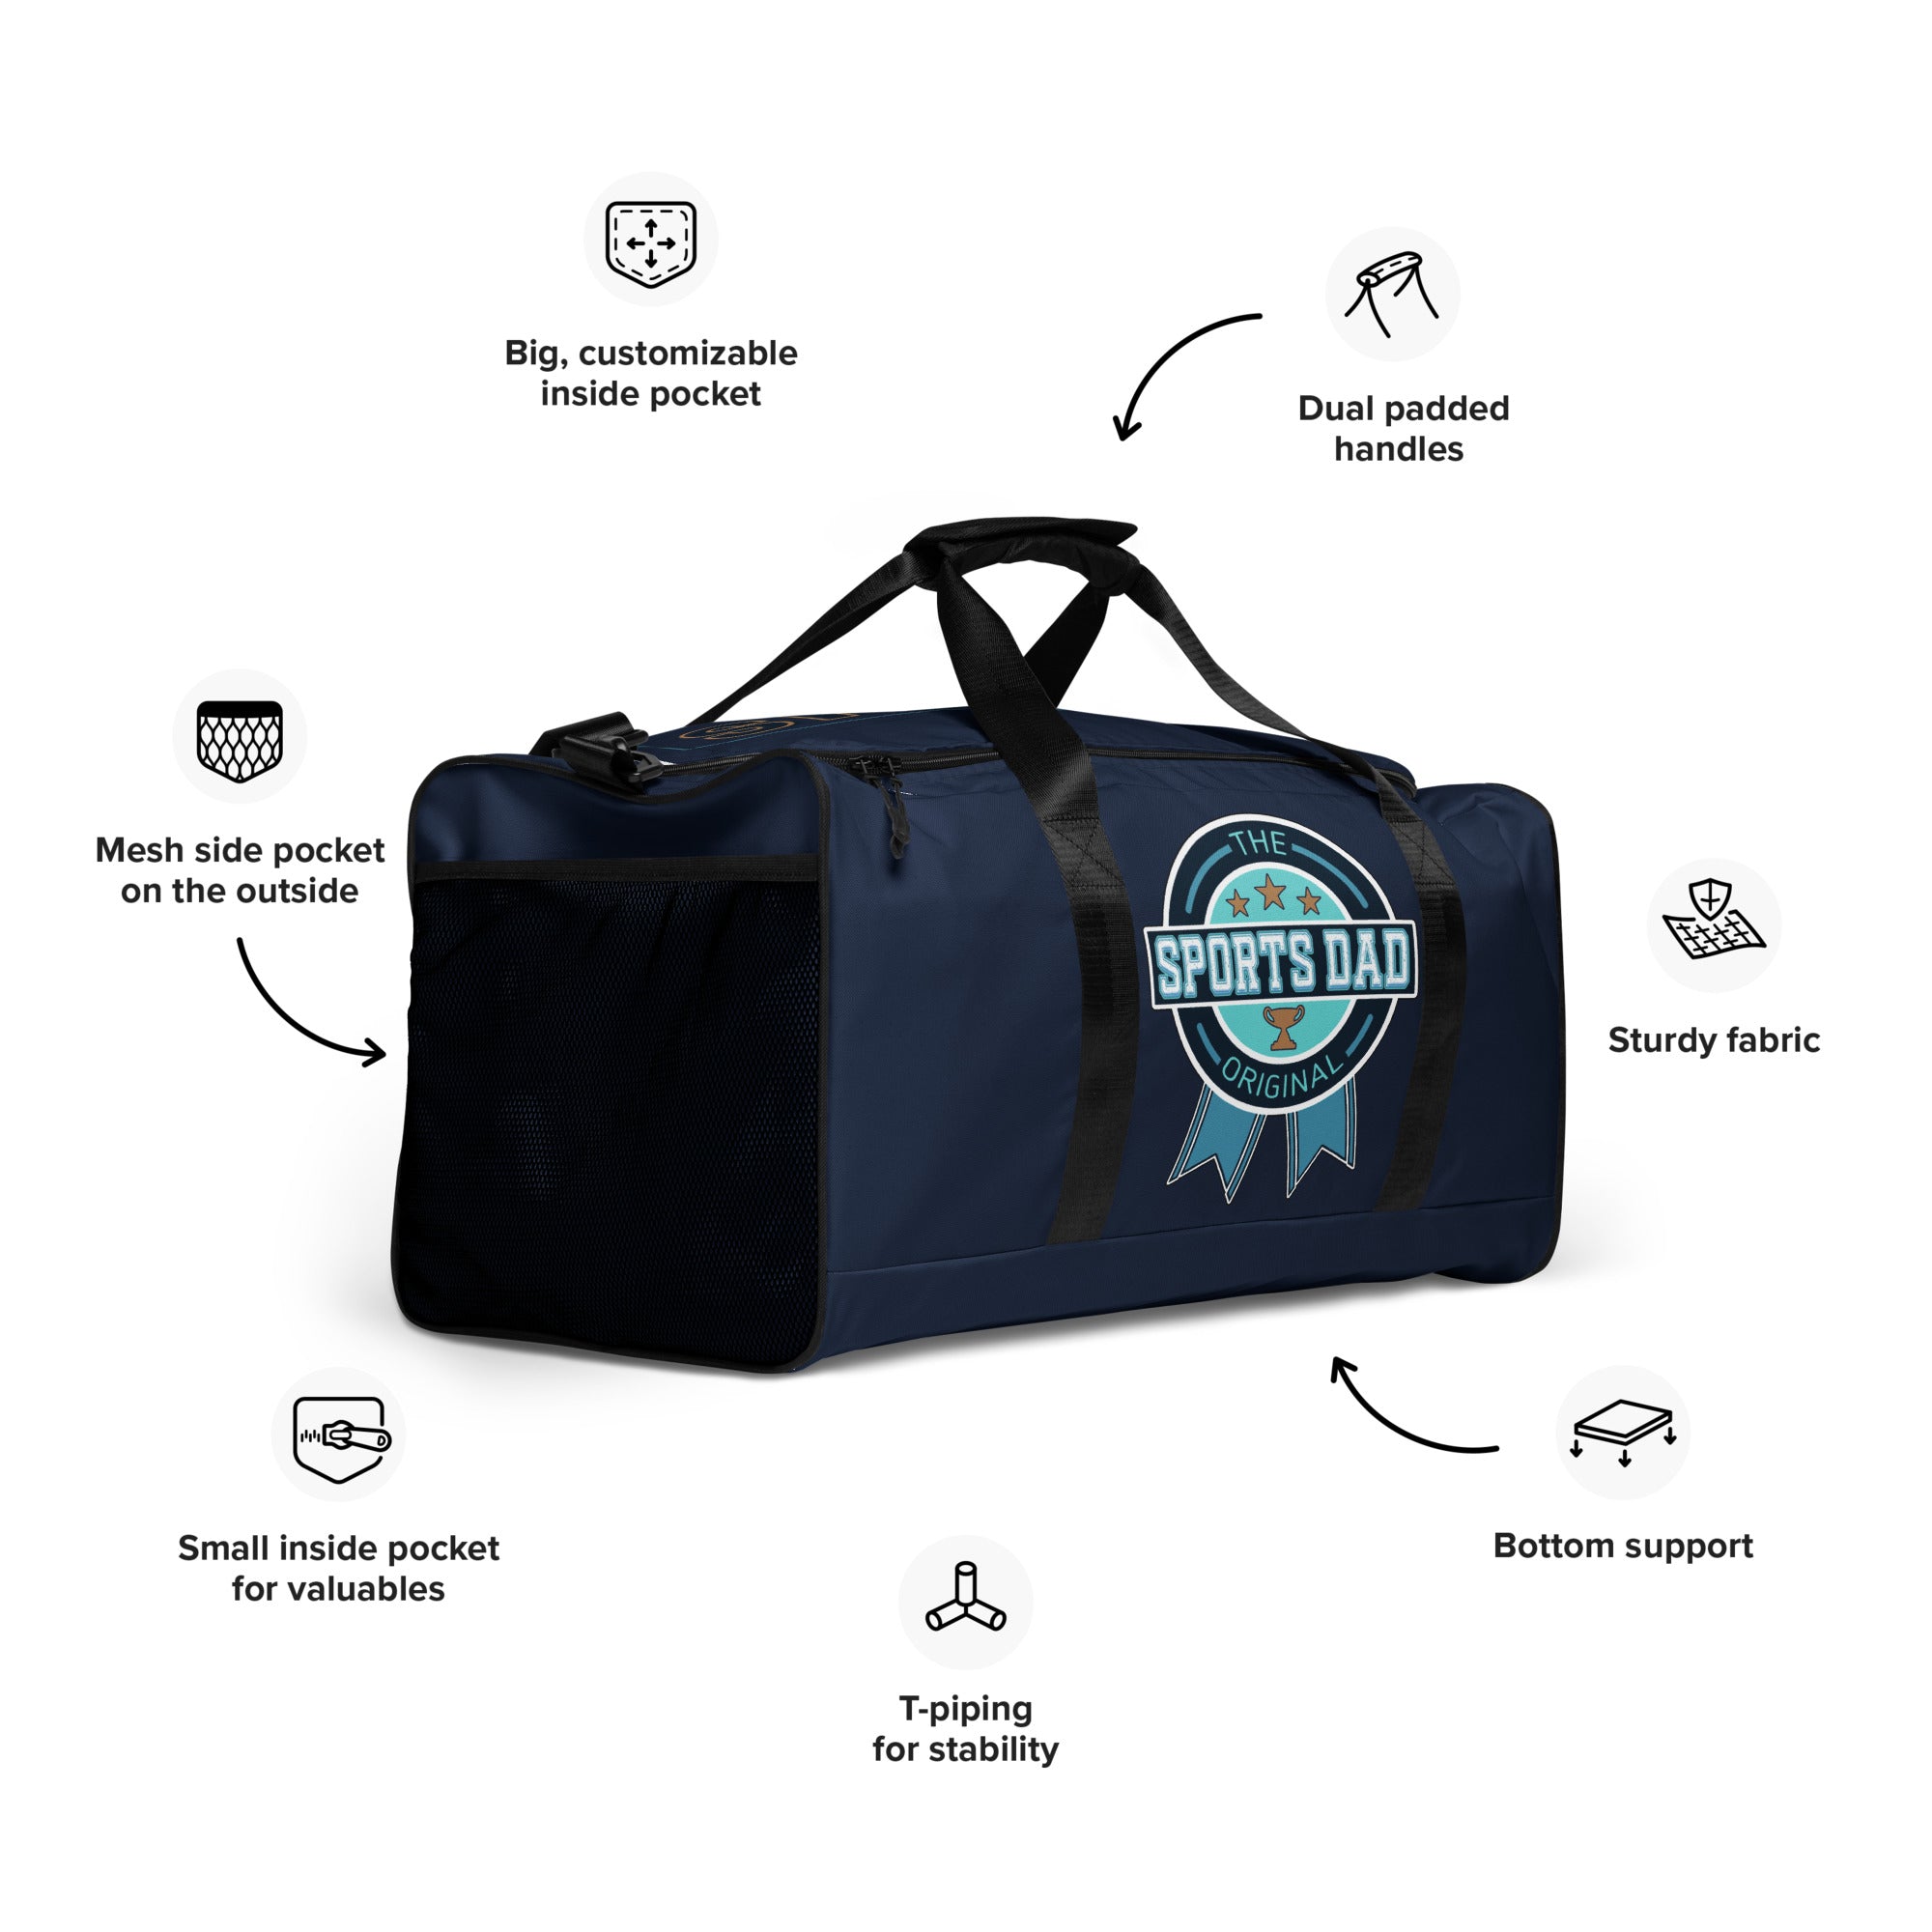 Sports Dad Ultimate Duffle Bag - Navy